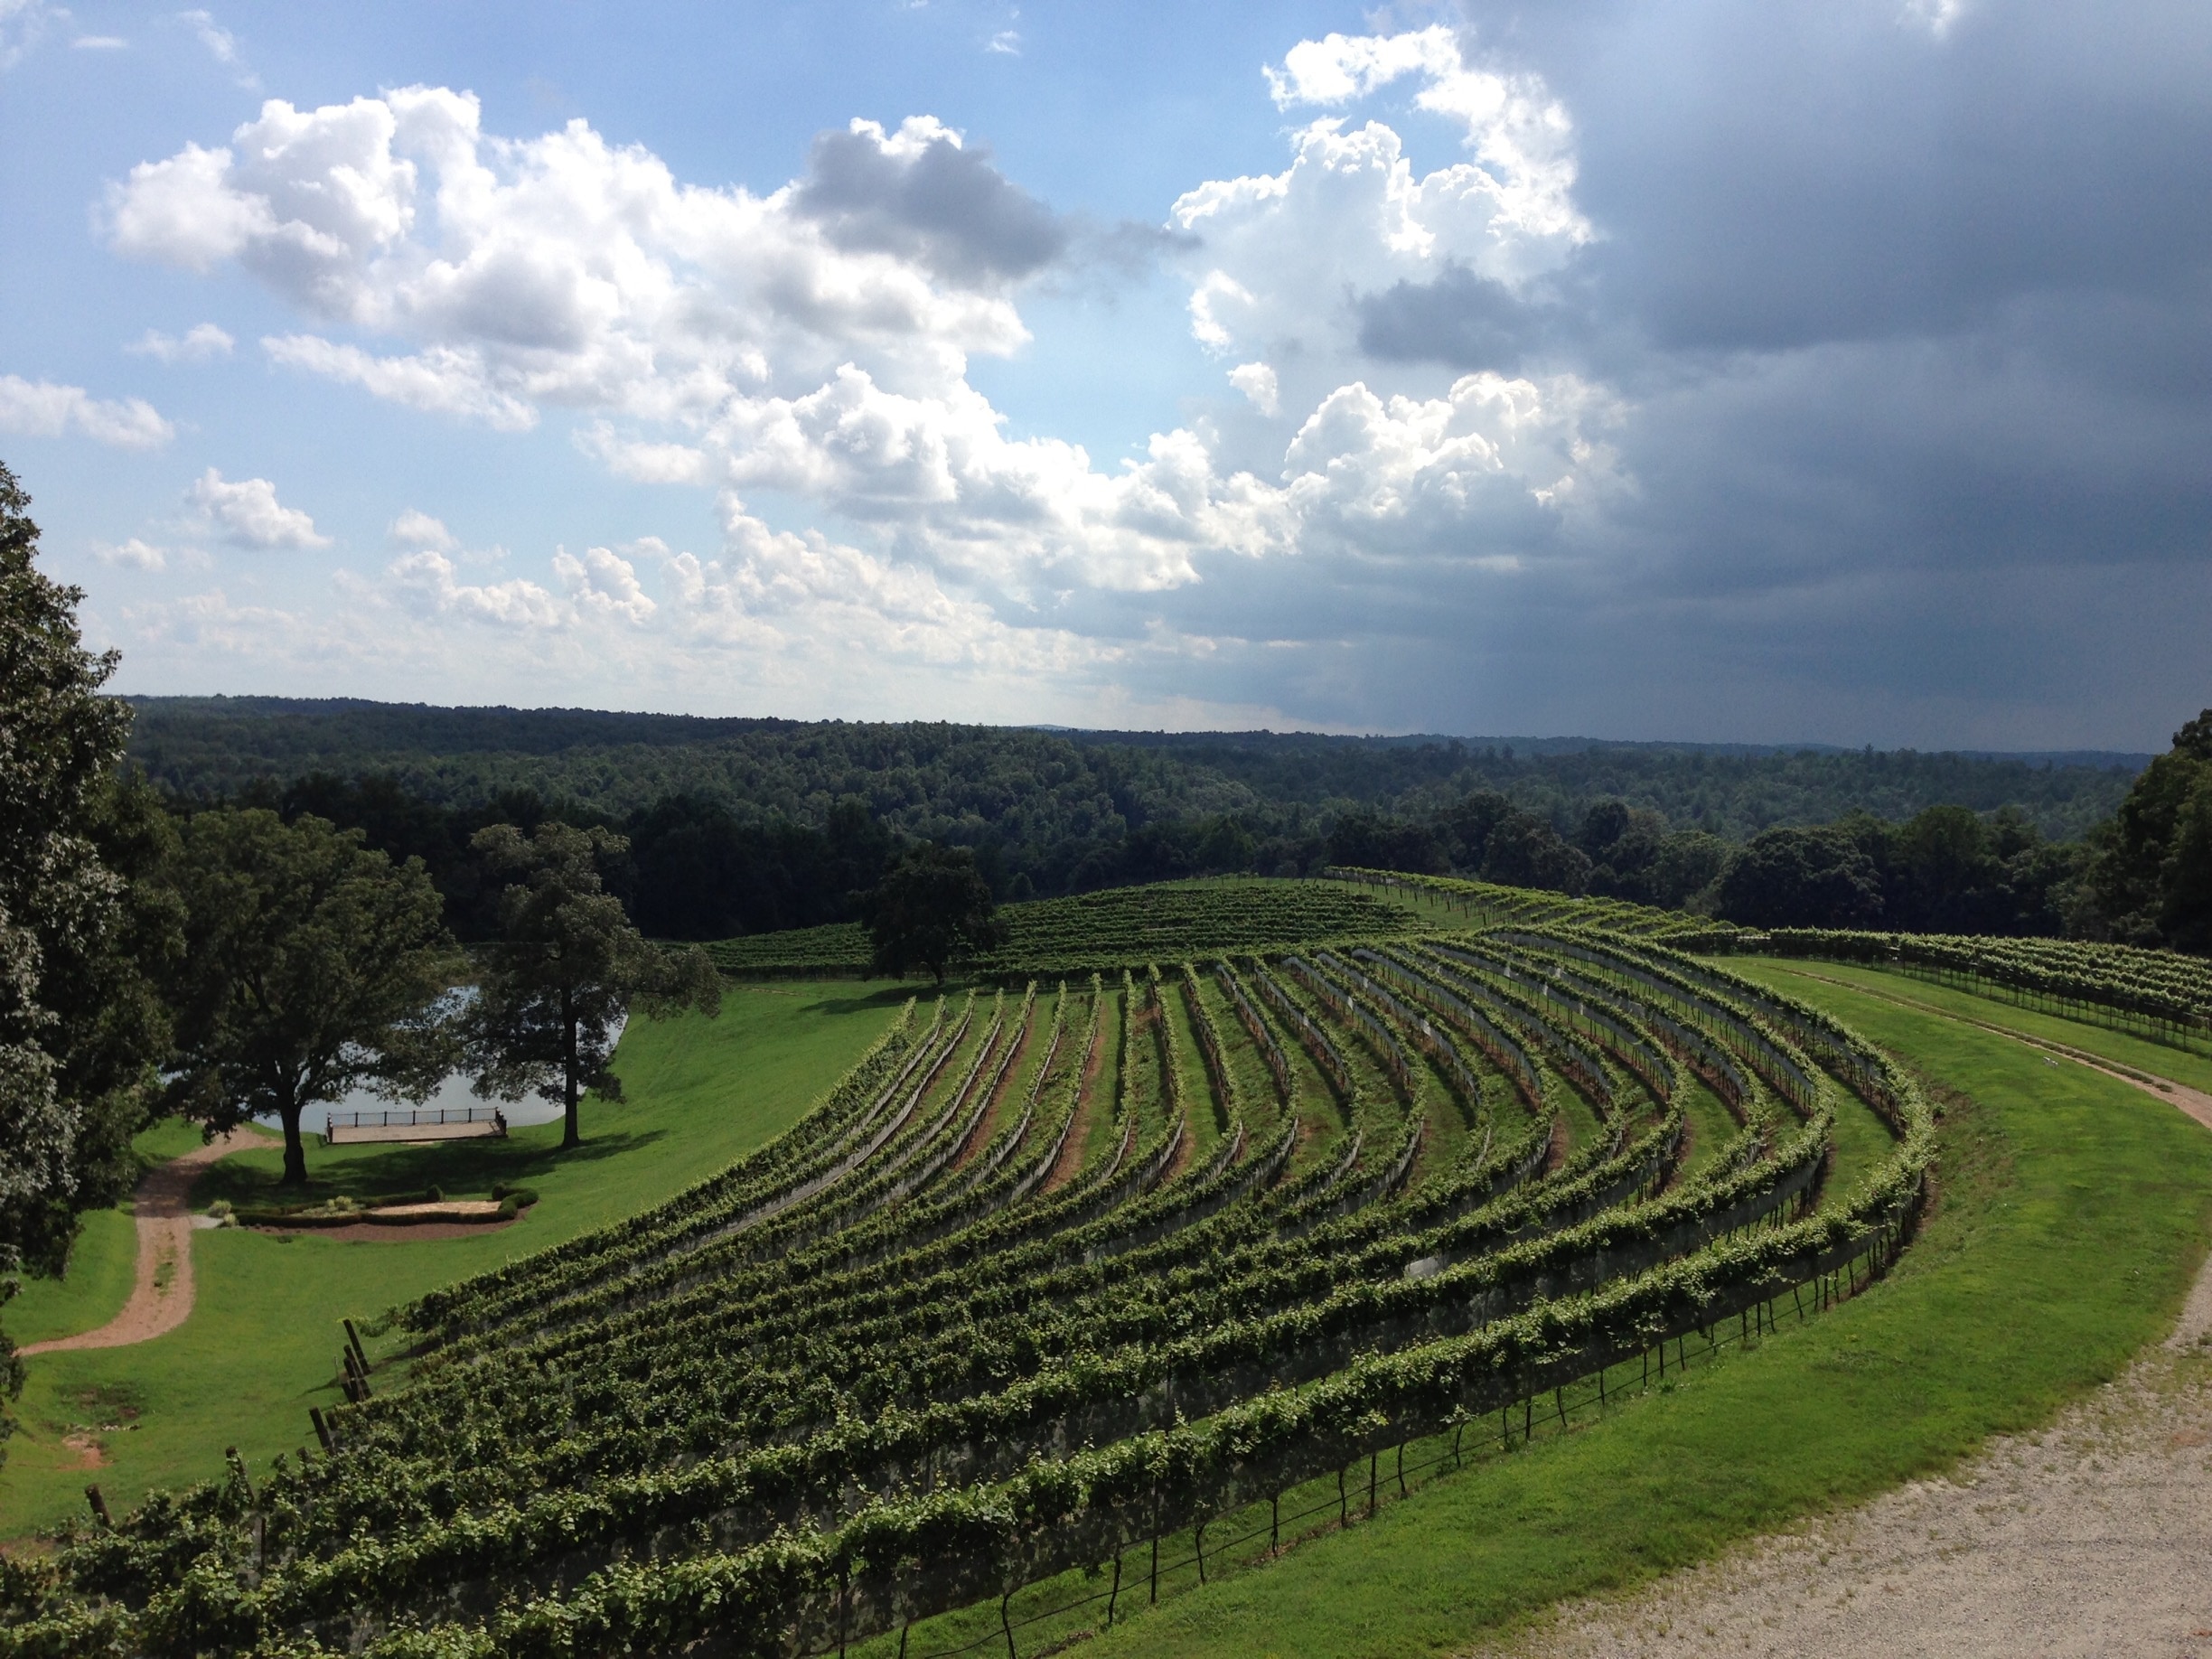 The local vineyards in Dahlonega. Great place to go taste wine and have a good time. #patterns